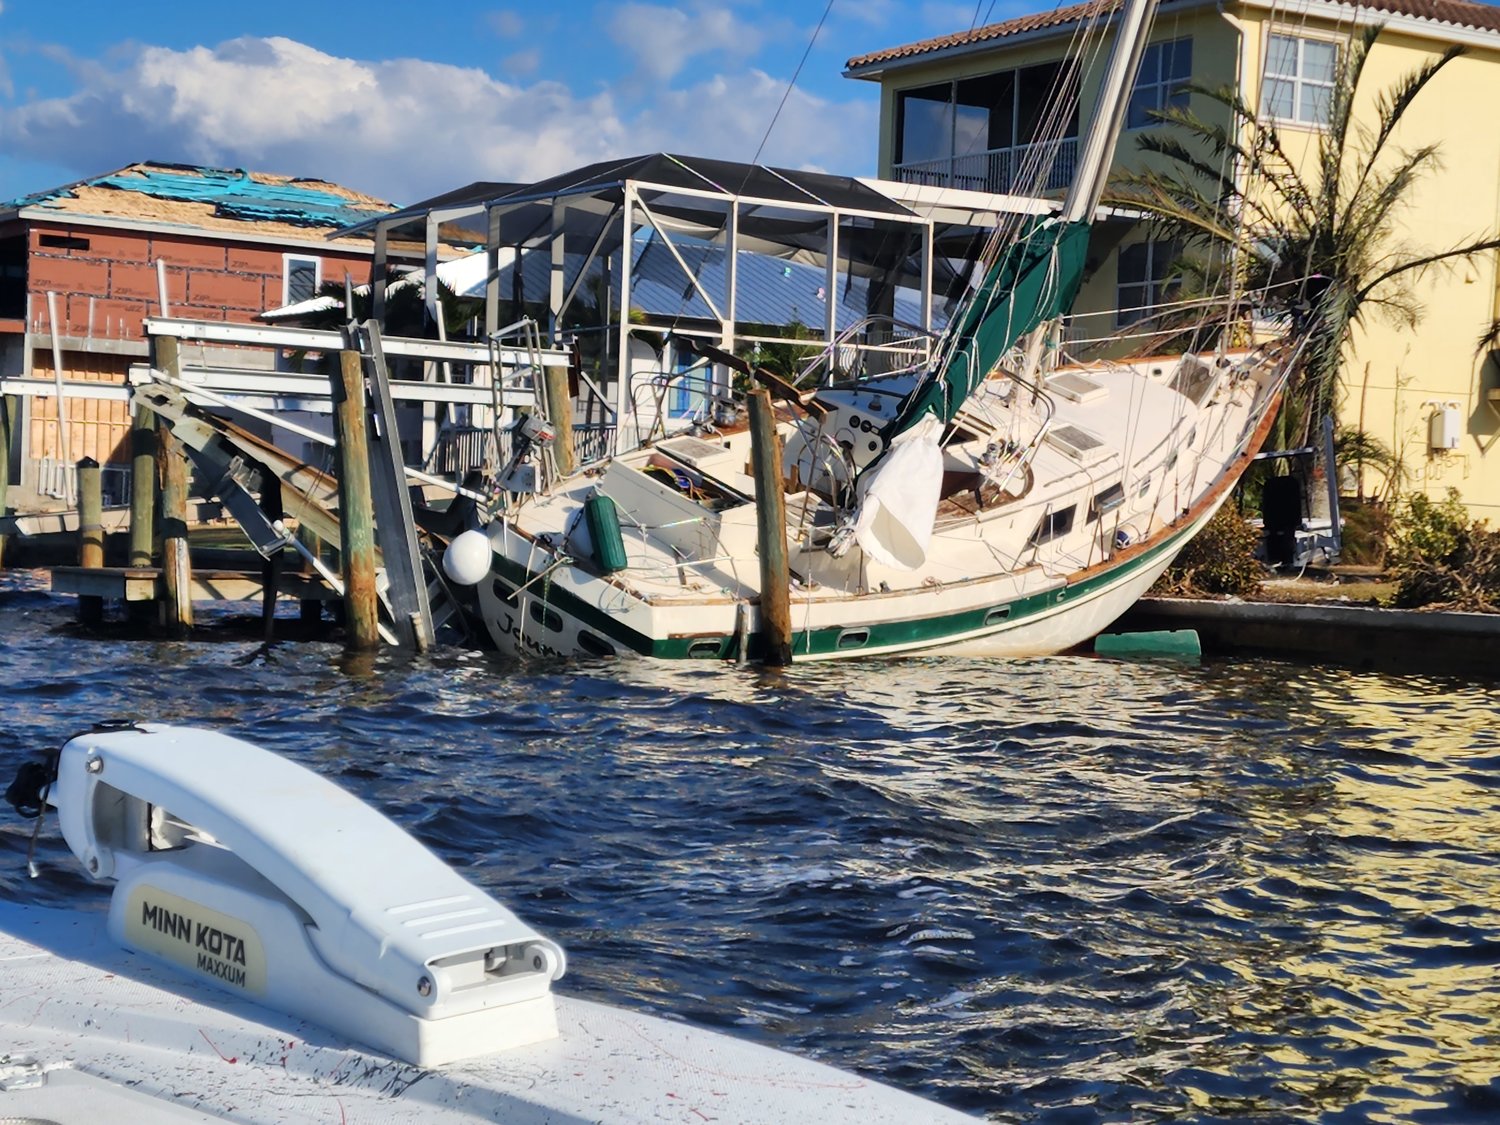 The canals surrounding Stephen Knapman's Matlacha neighborhood were full of scenes like this one, where yards remain adorned with high-and-dry vessels, many of which traveled from neighbors’ docks and boat lifts.